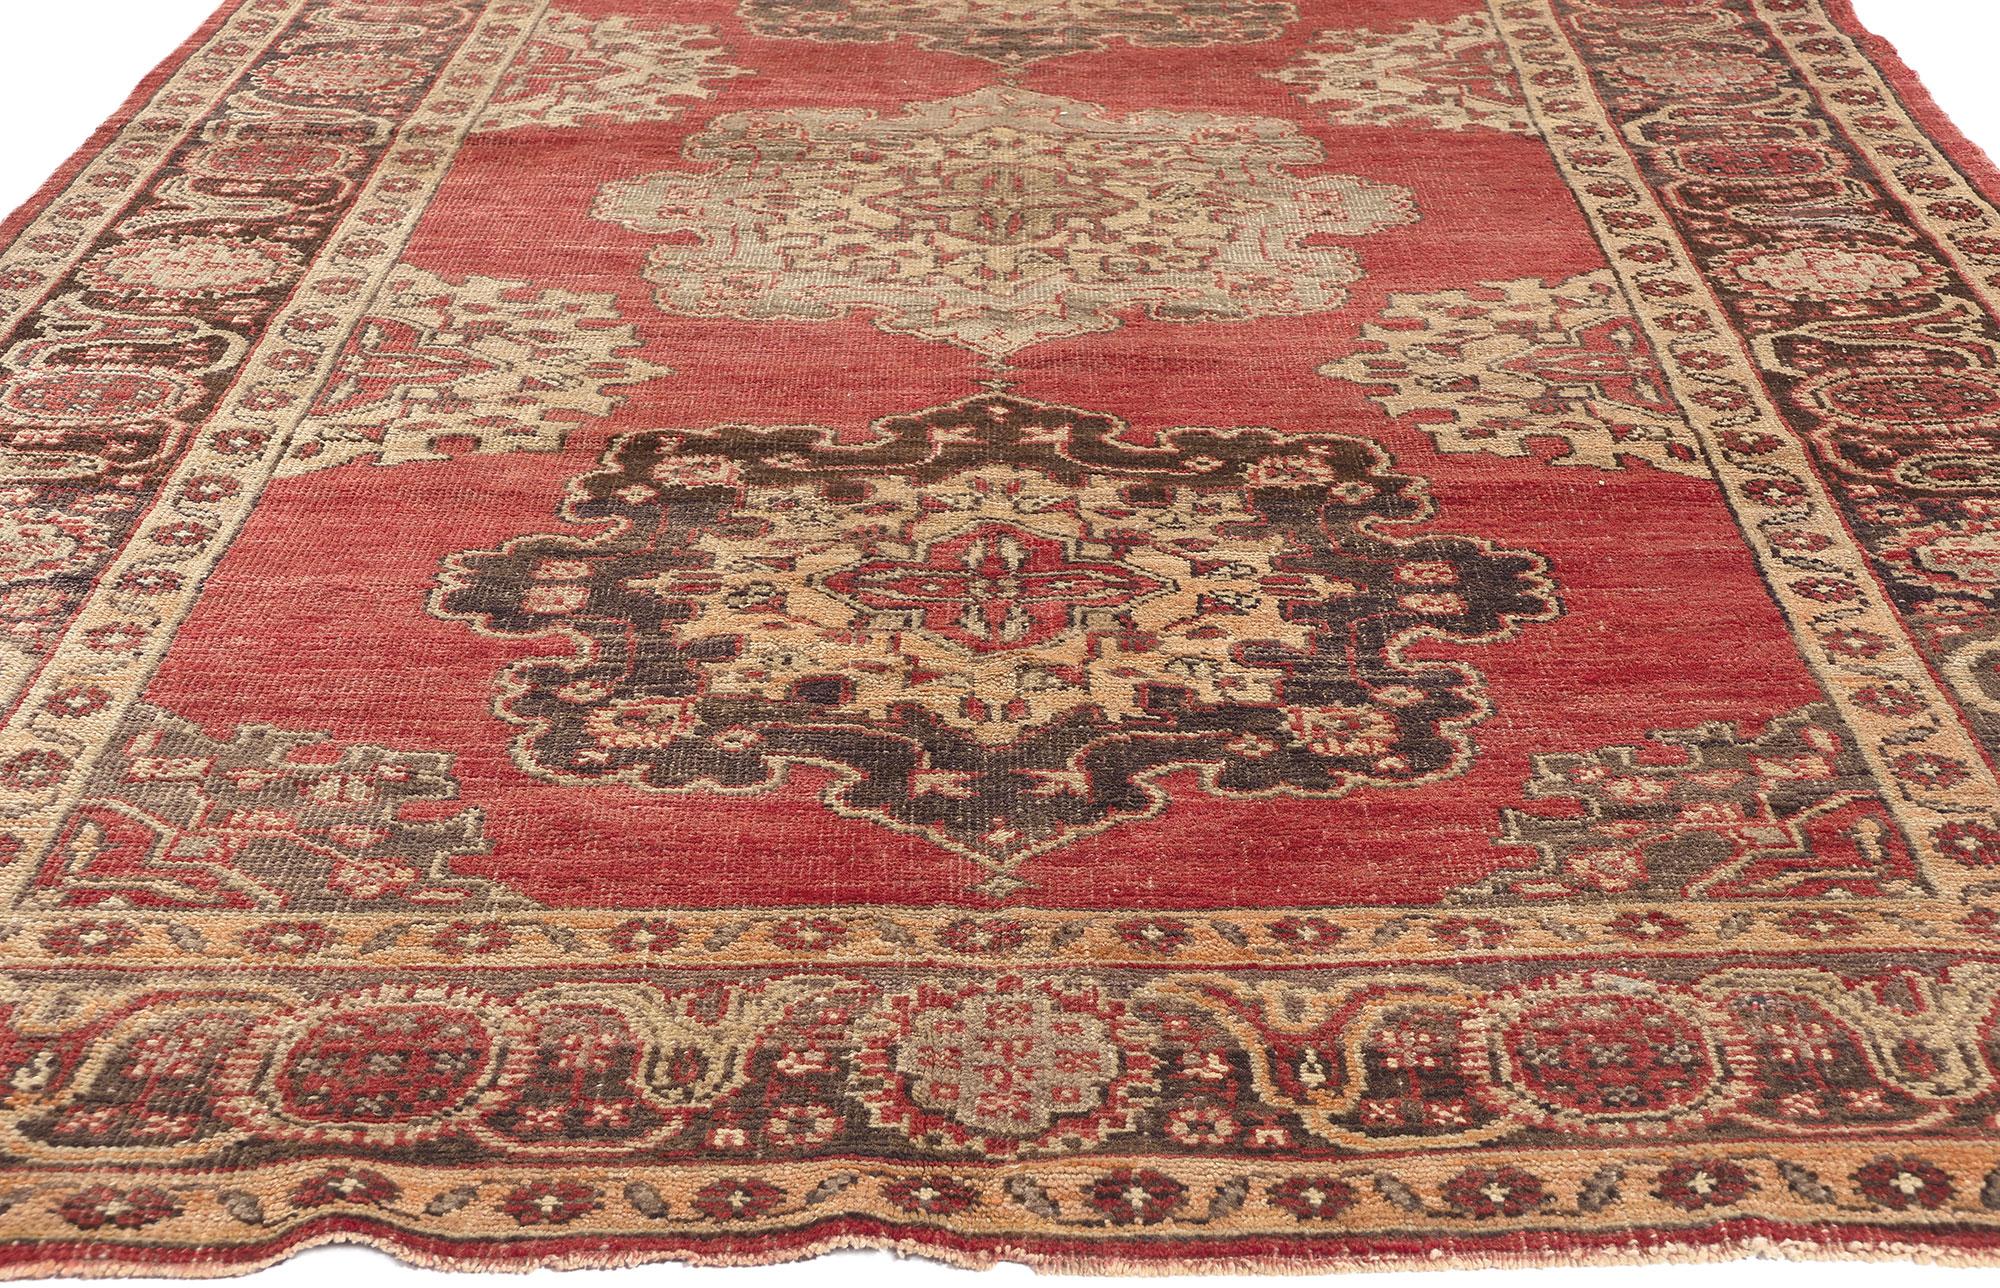 Vintage Turkish Oushak Rug, Timeless Allure Meets Rustic Earth-Tone Elegance In Good Condition For Sale In Dallas, TX